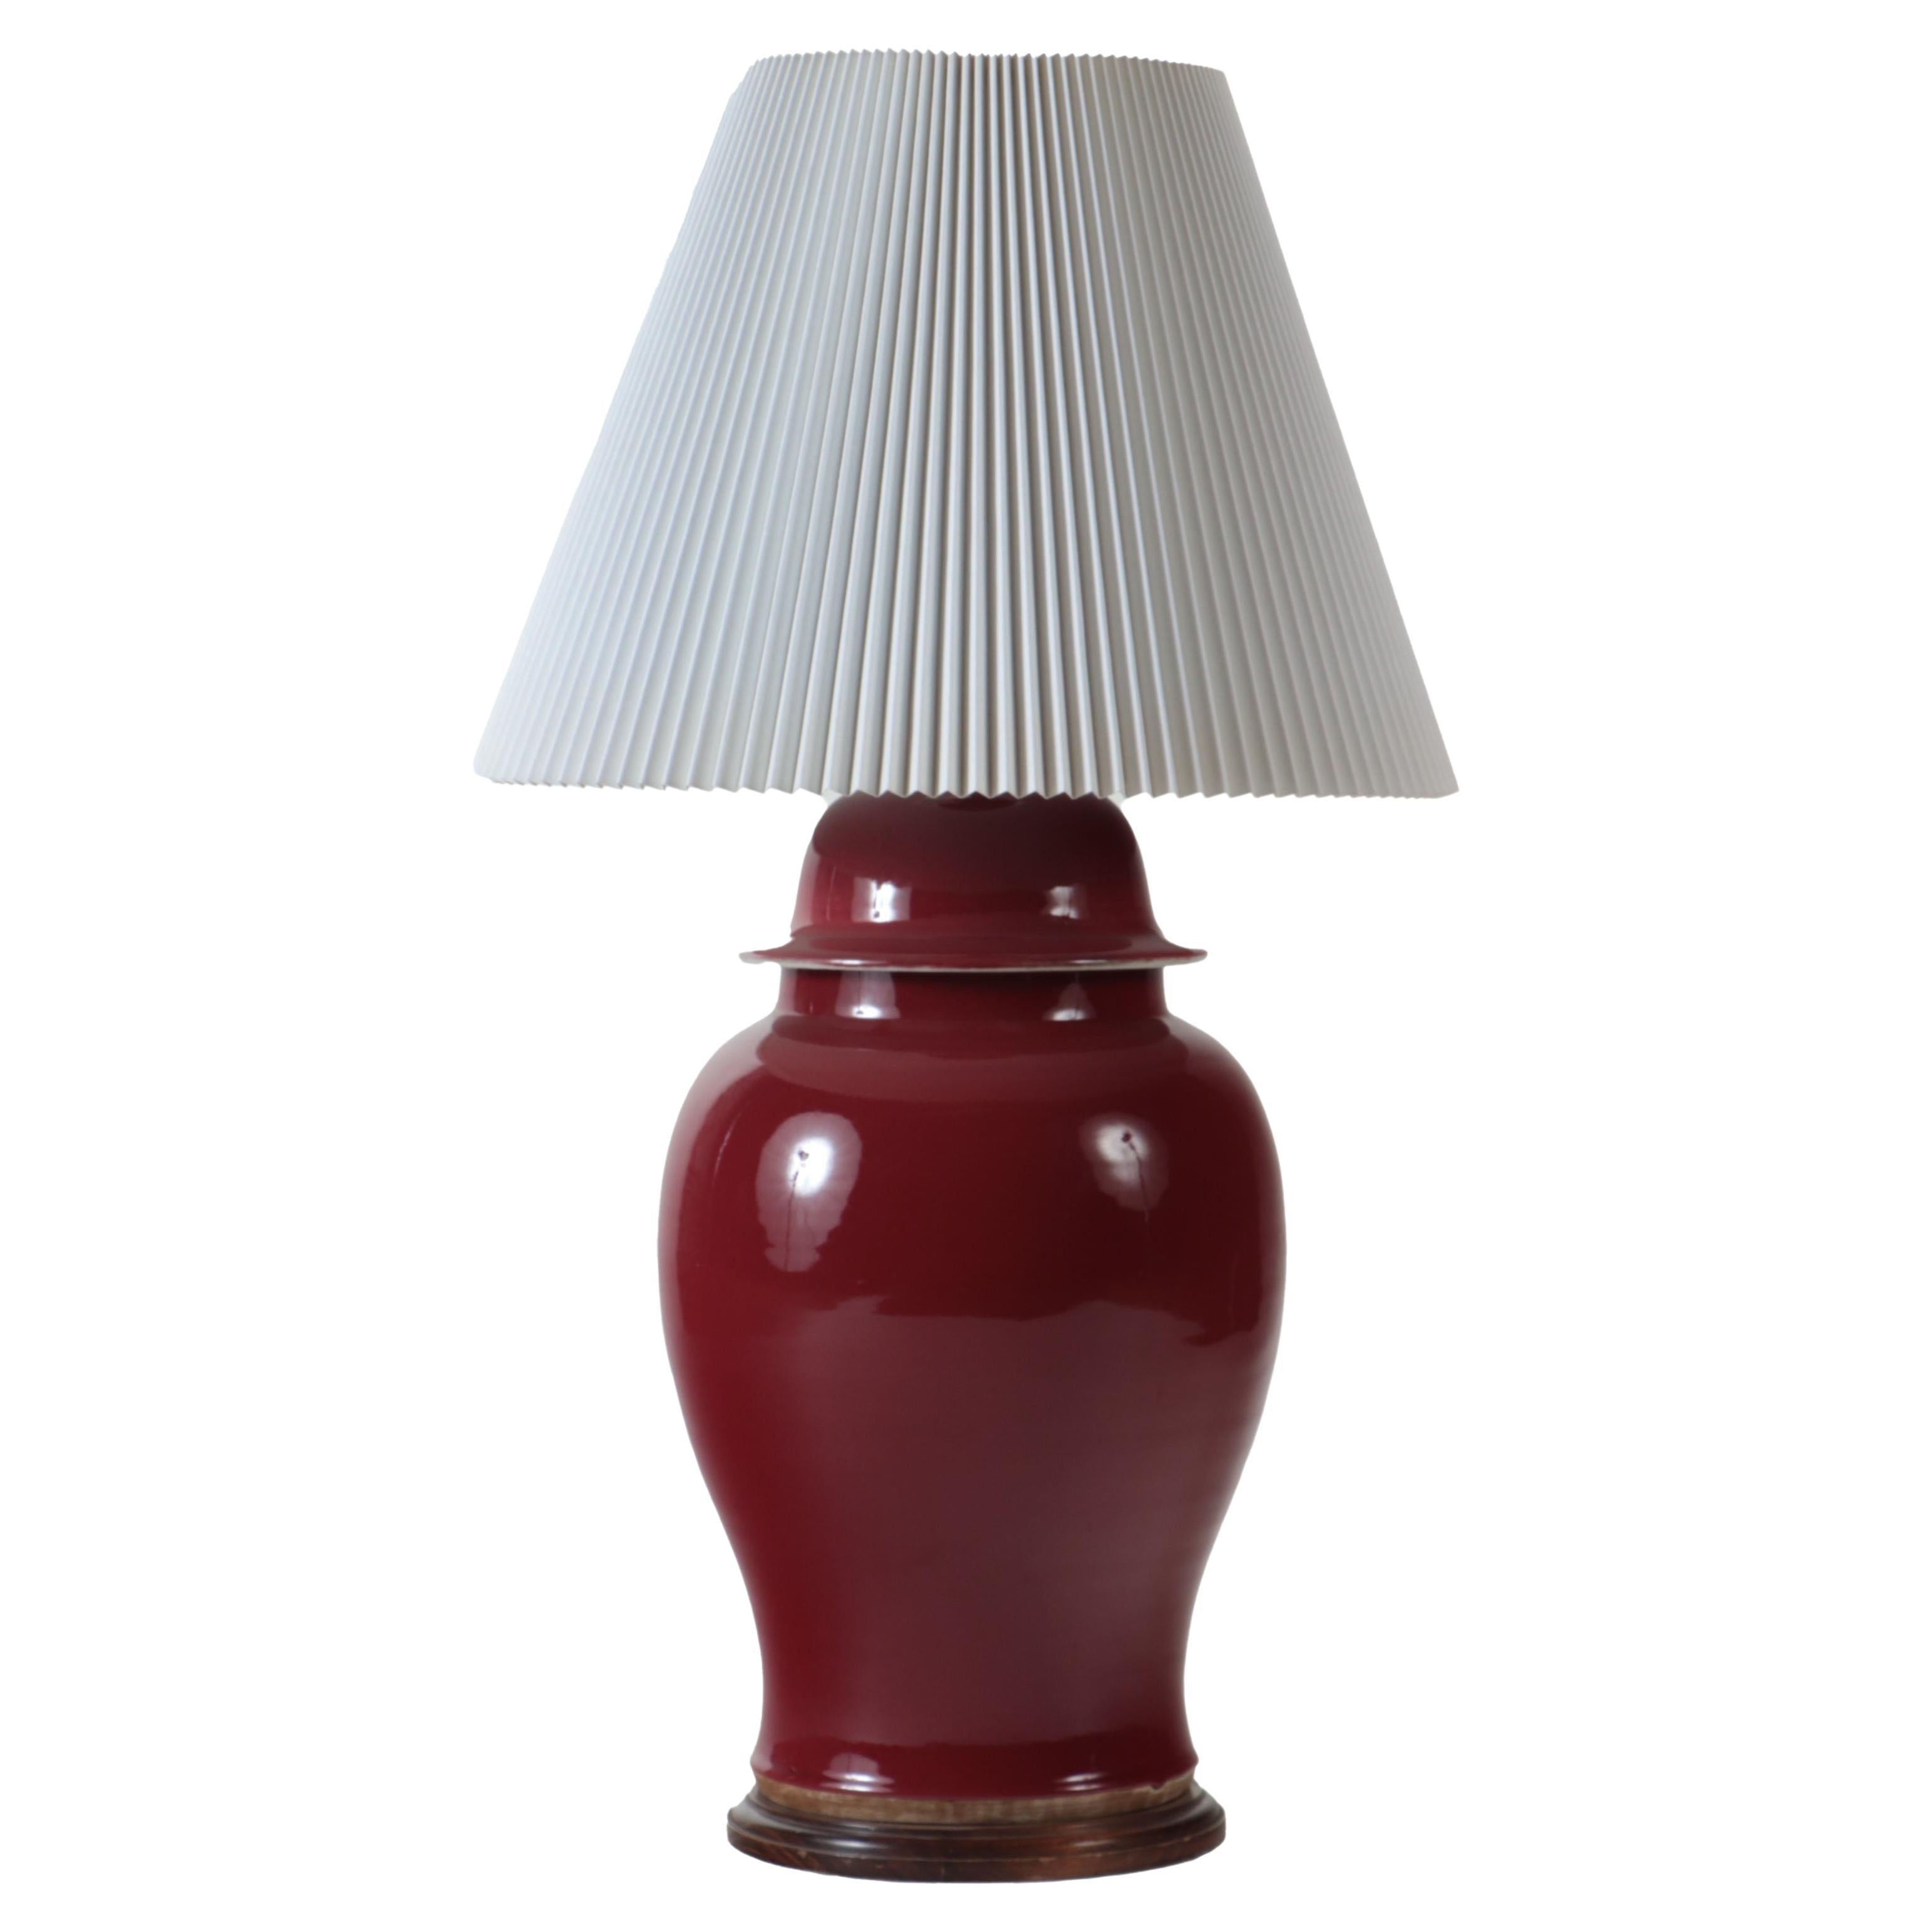 Oxblood Vase Table Lamp on Wooden Base, circa 1970s For Sale